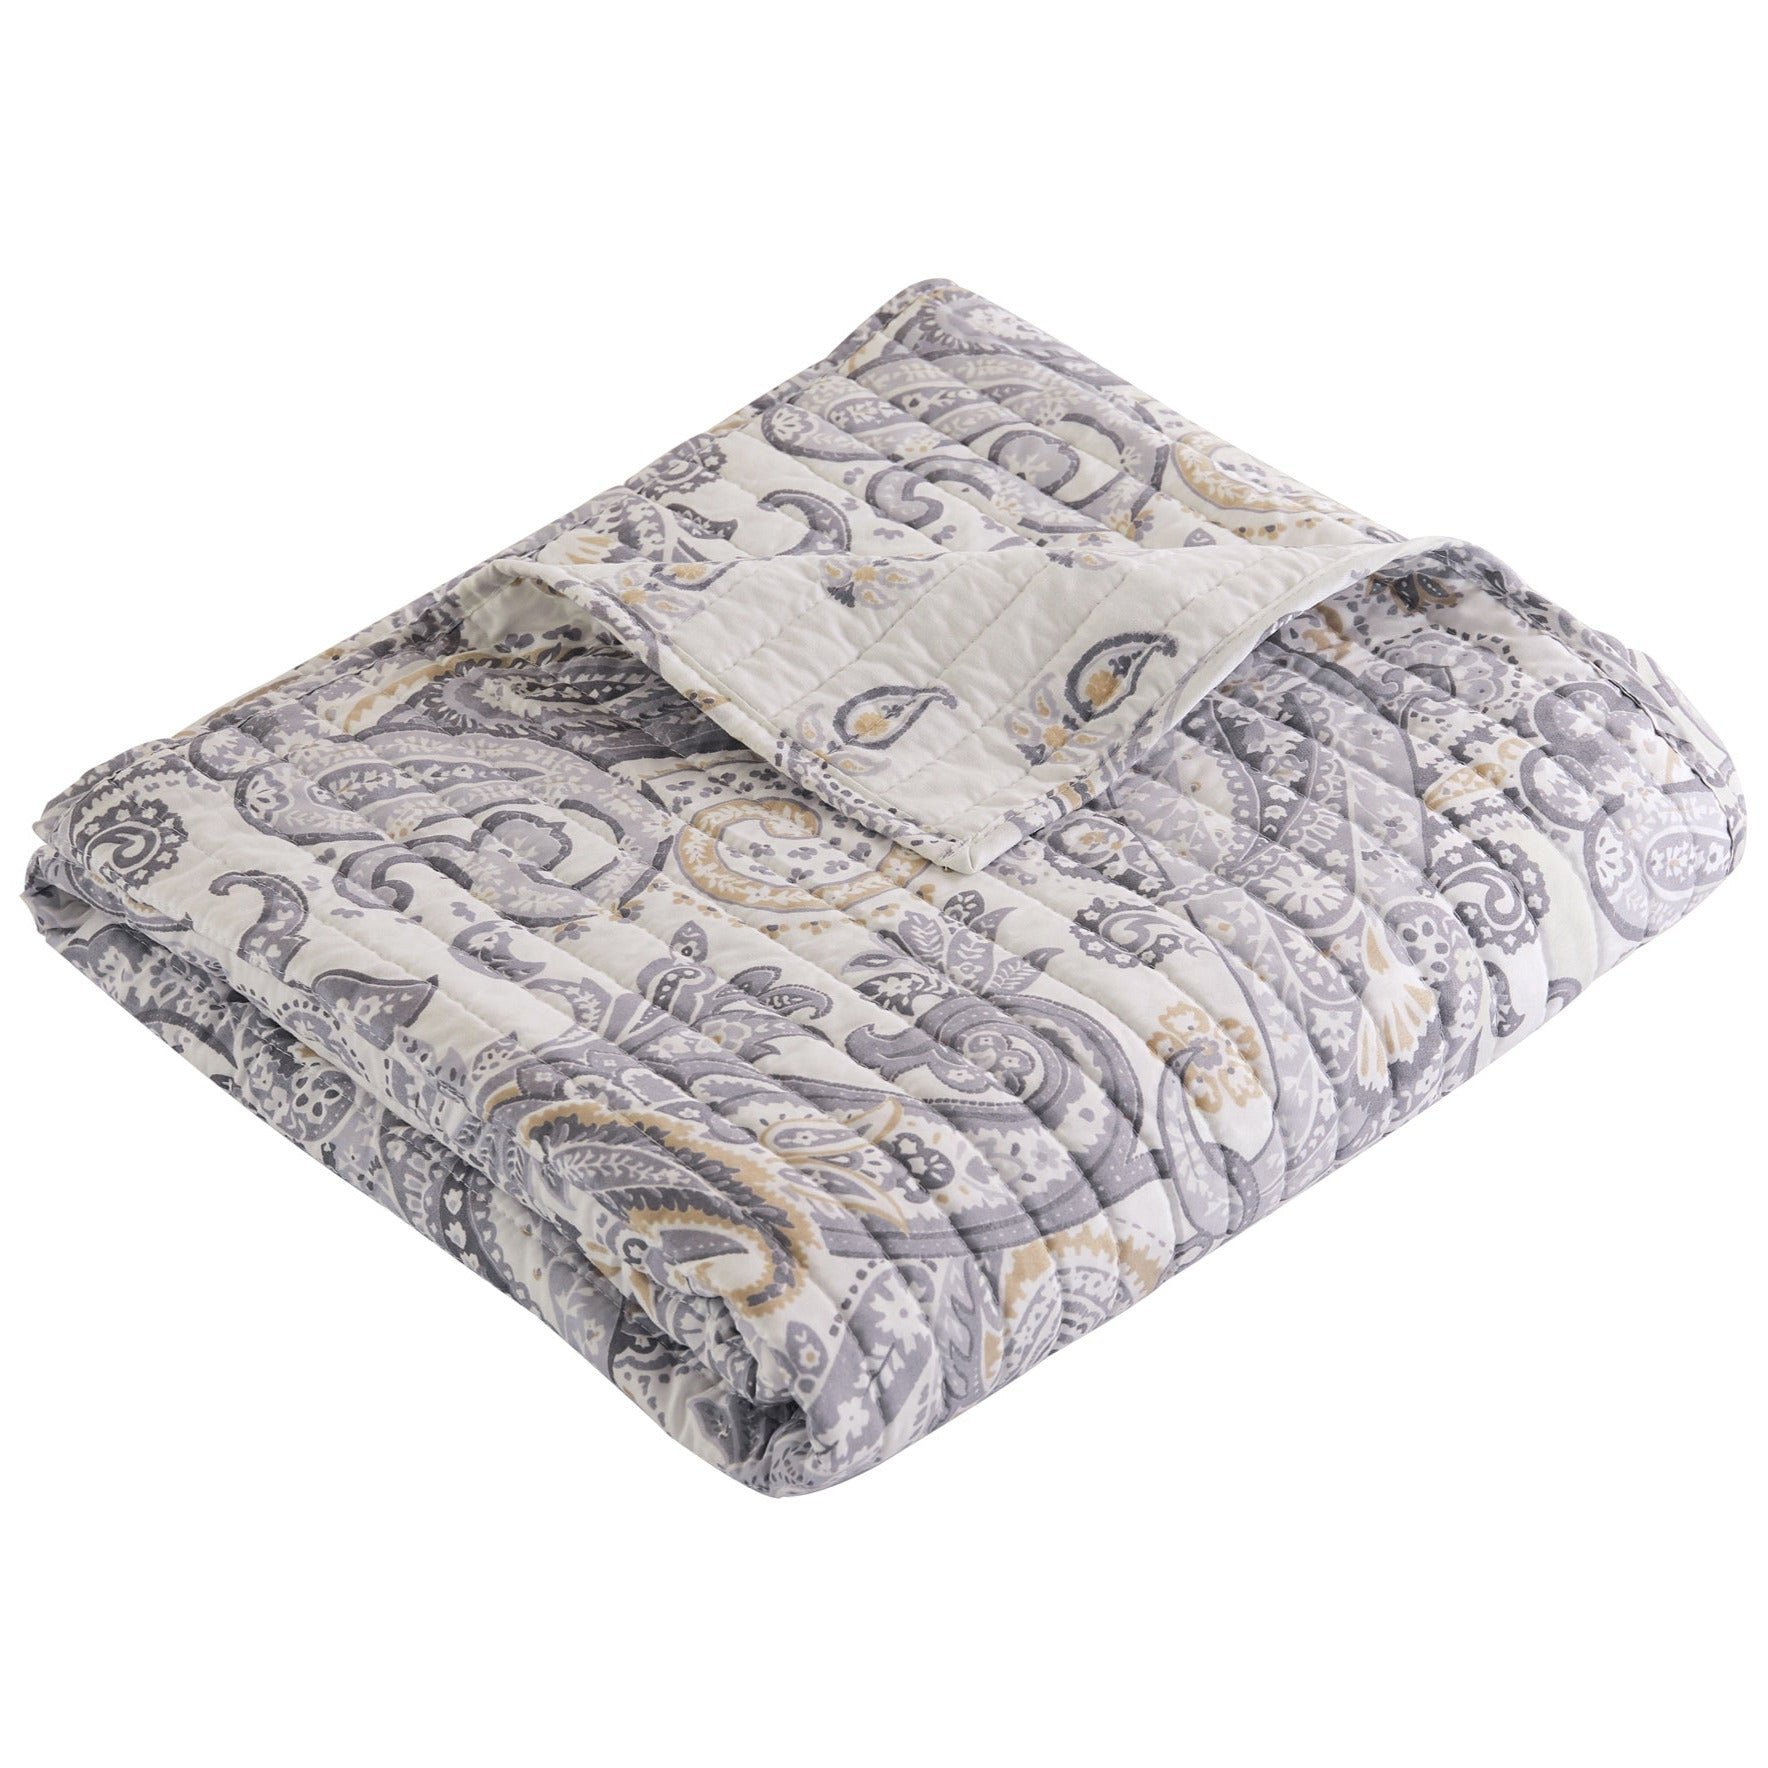 Maribelle Neutral Quilted Throw